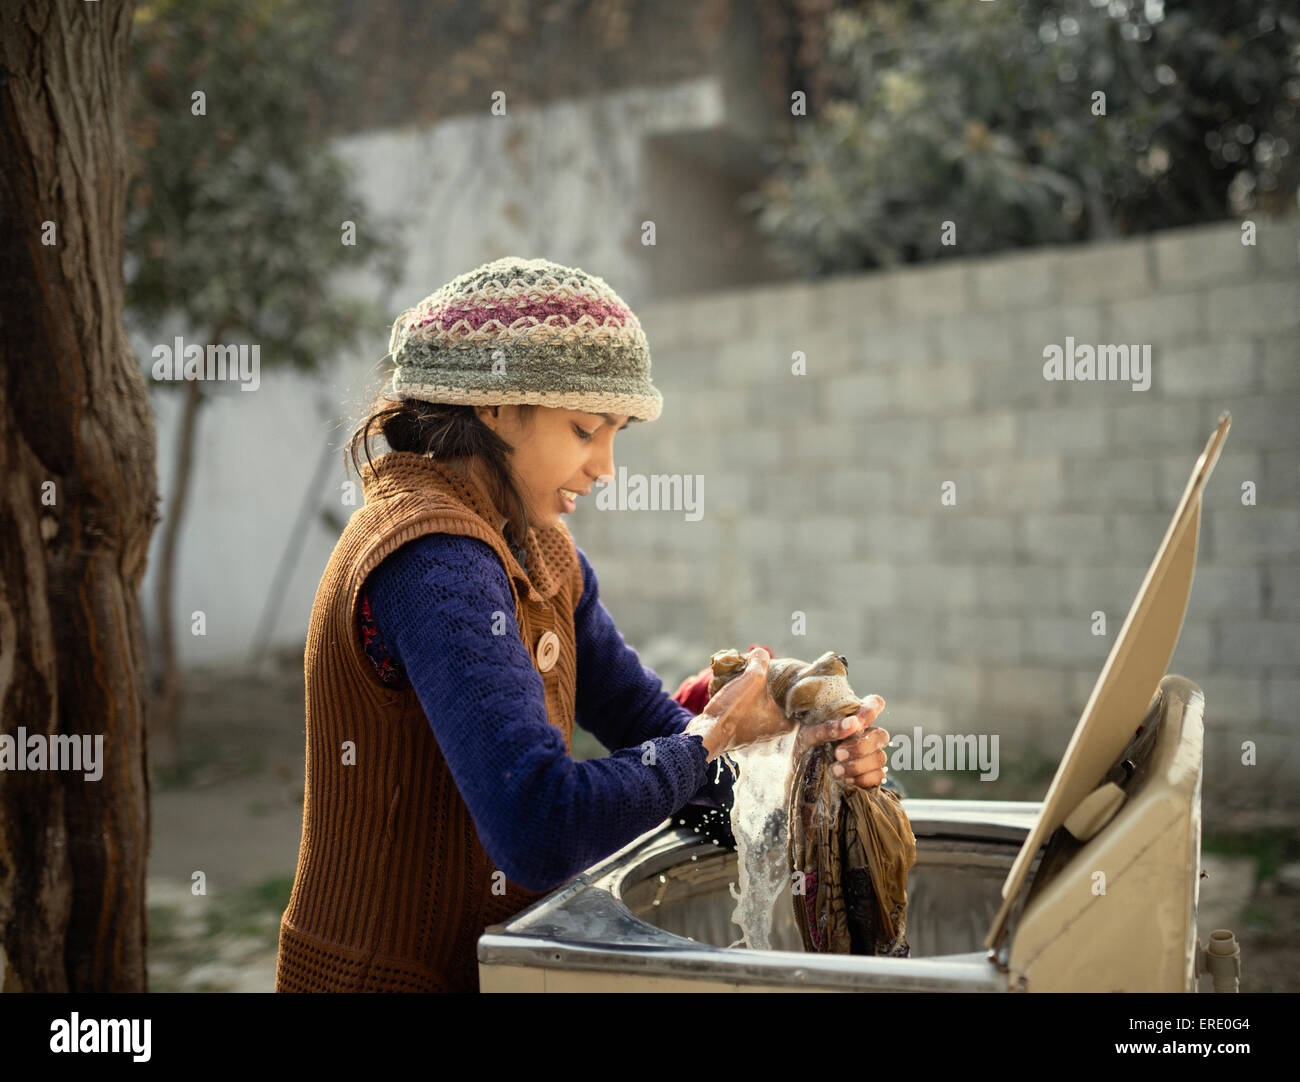 Woman in knit hat hand-washing clothing outdoors Stock Photo